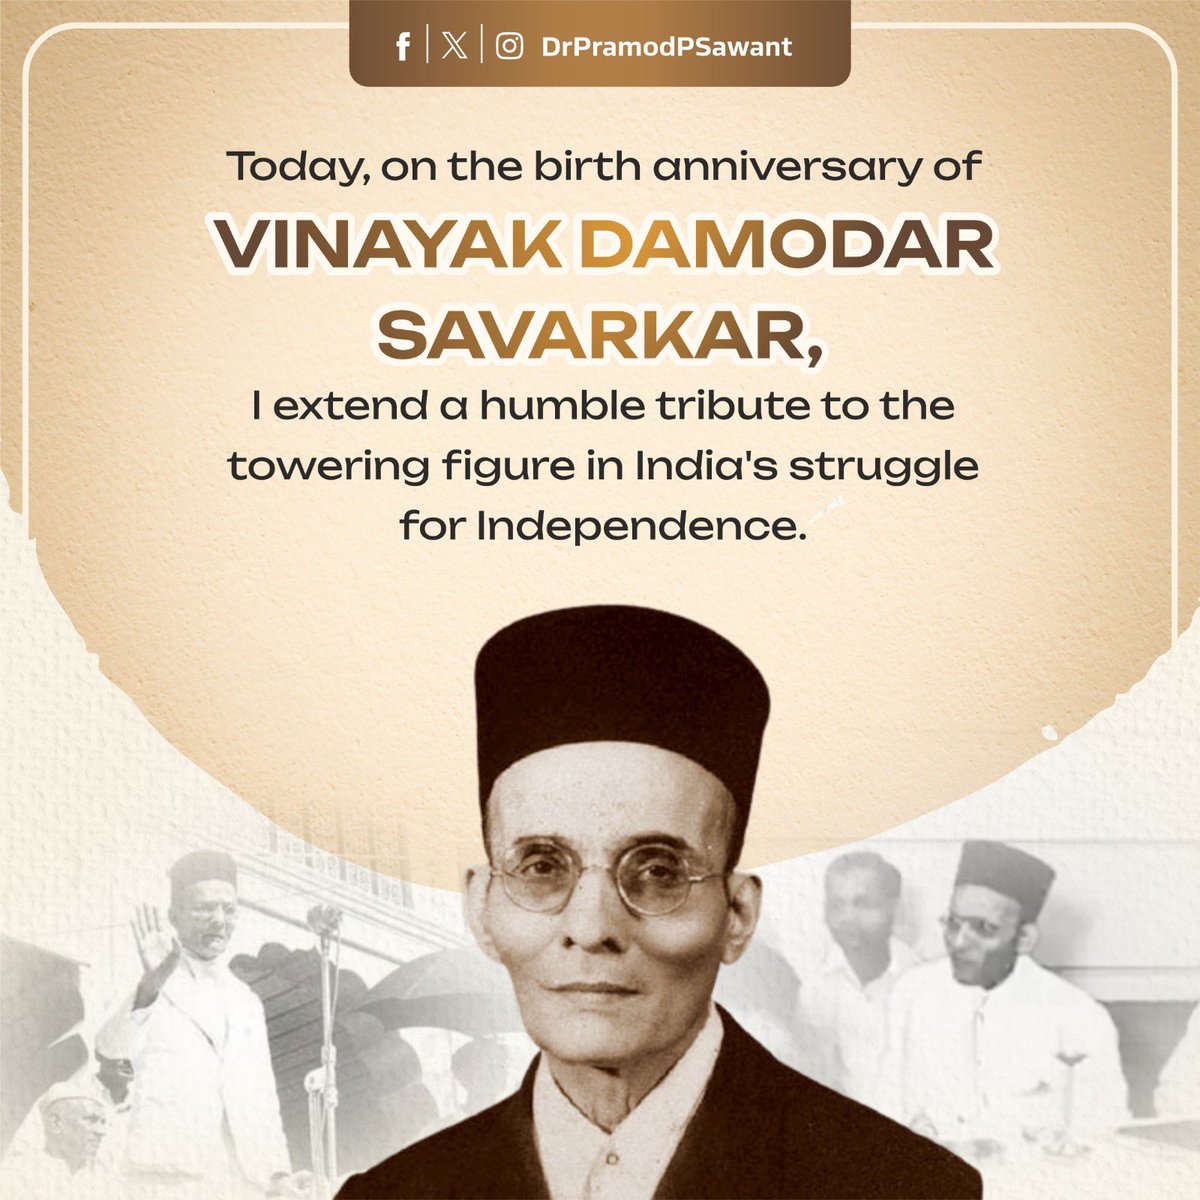 Today, on the birth anniversary of #VinayakDamodarSavarkar Ji, I extend a humble tribute to the towering figure in India's struggle for independence. His patriotism continues to ignite values of integrity and unity among everyone and inspire the future generation.